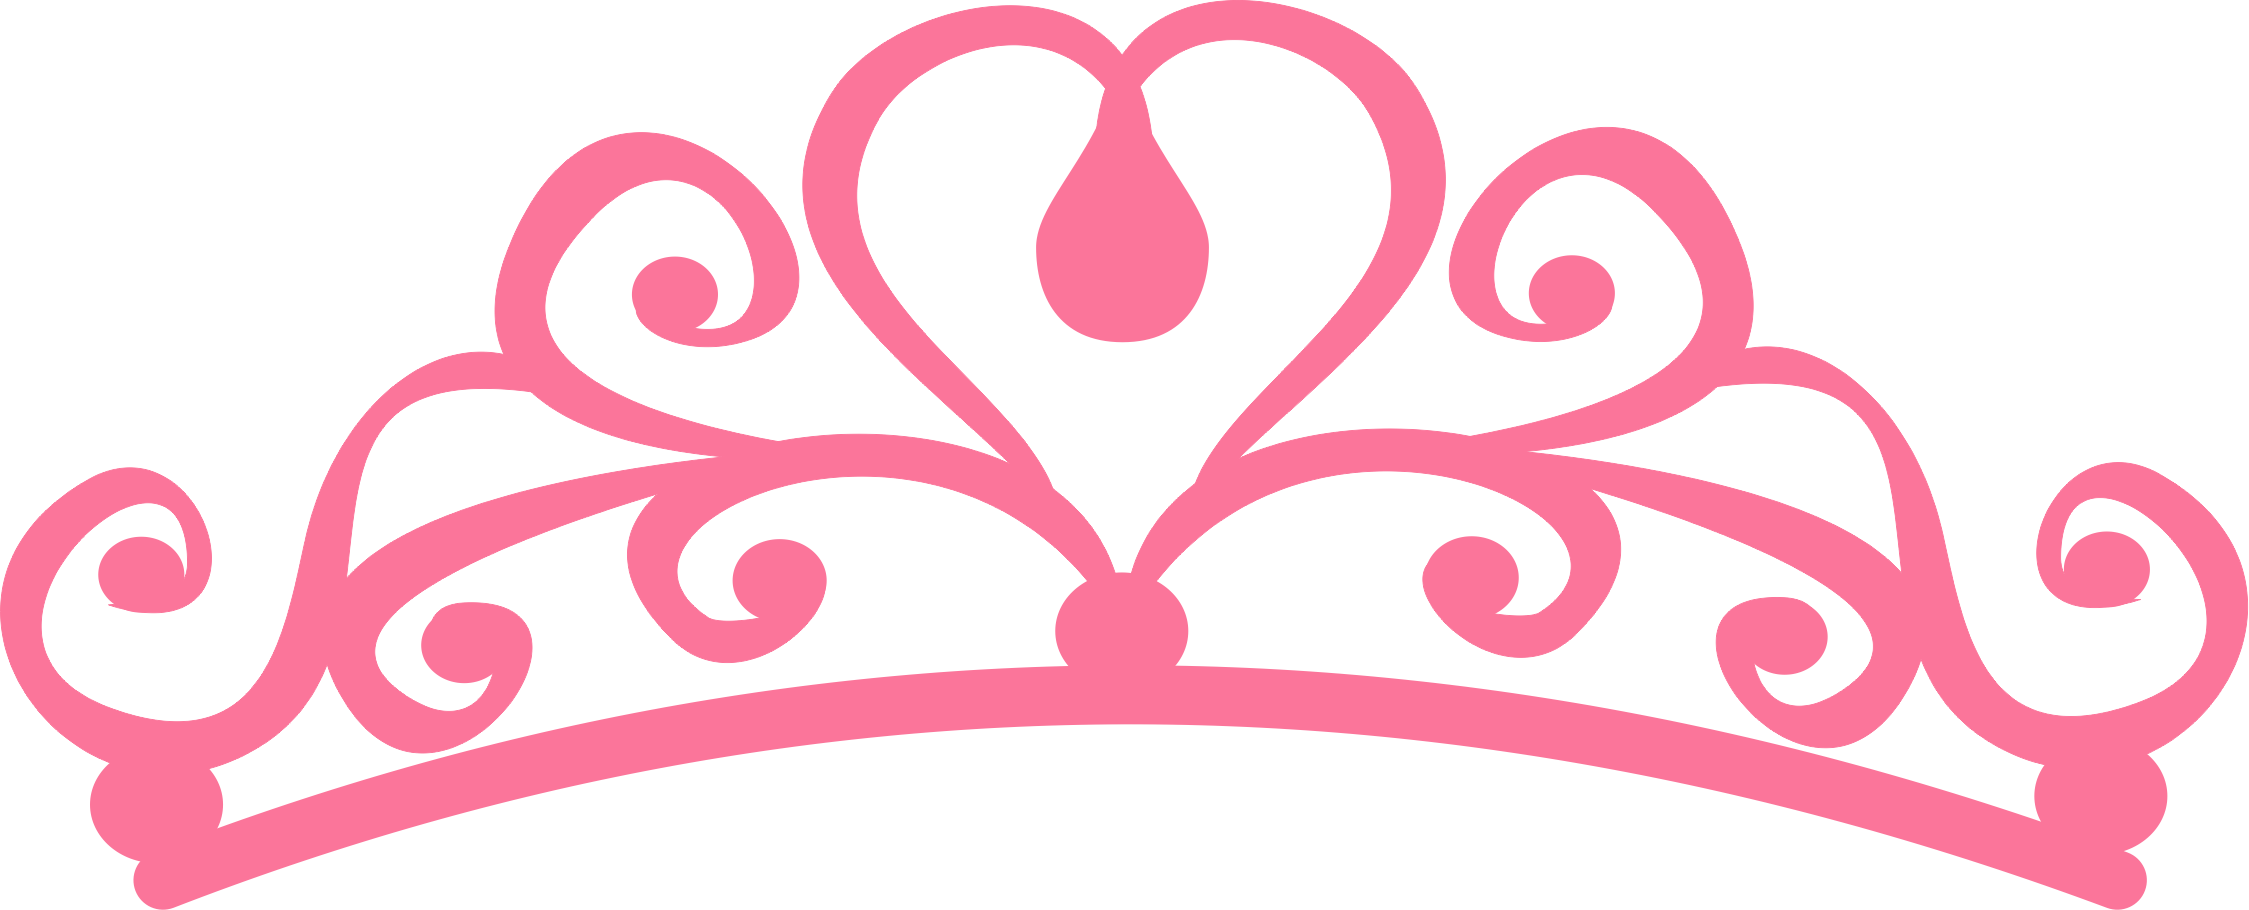 Words clipart princess. Images for tiara tattoos